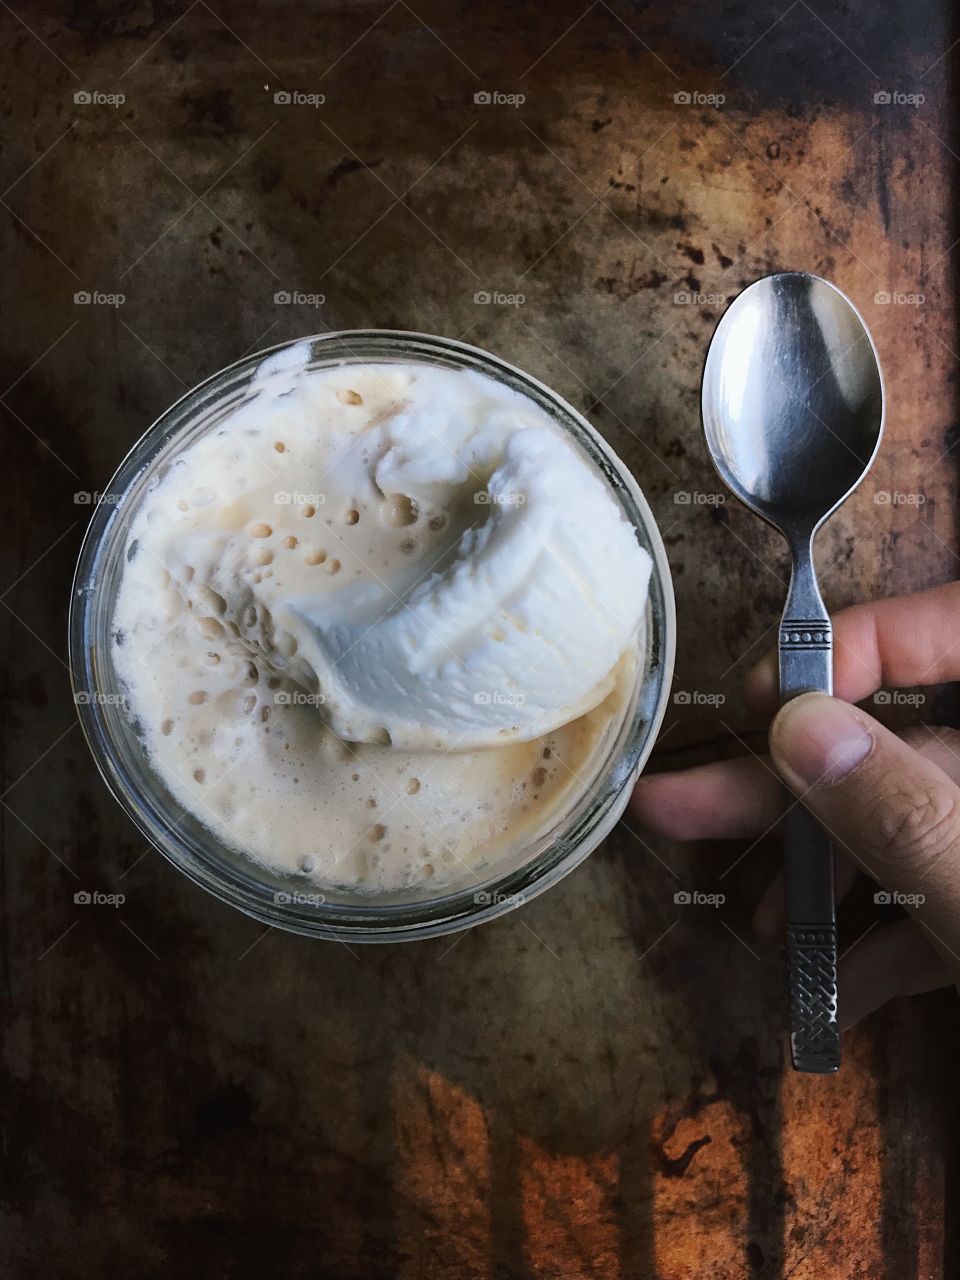 Delicious moody afternoon affogato.. This is a shot of ice cream and espresso with an old spoon. 